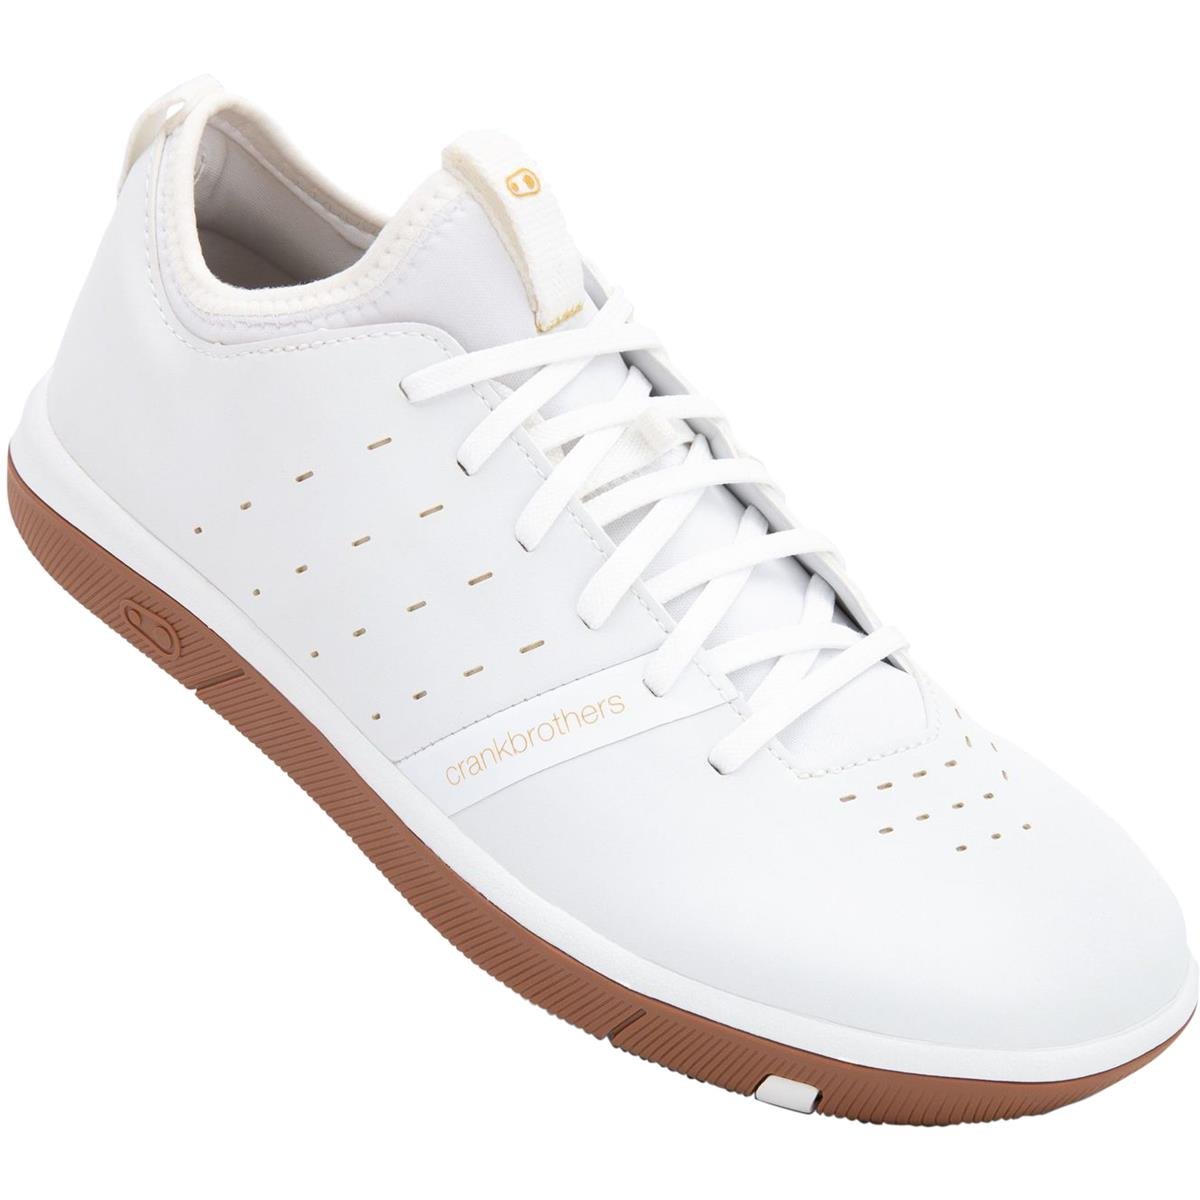 Crankbrothers MTB Shoes Stamp Street Lace Fabio Wibmer - White/Gold/Gum